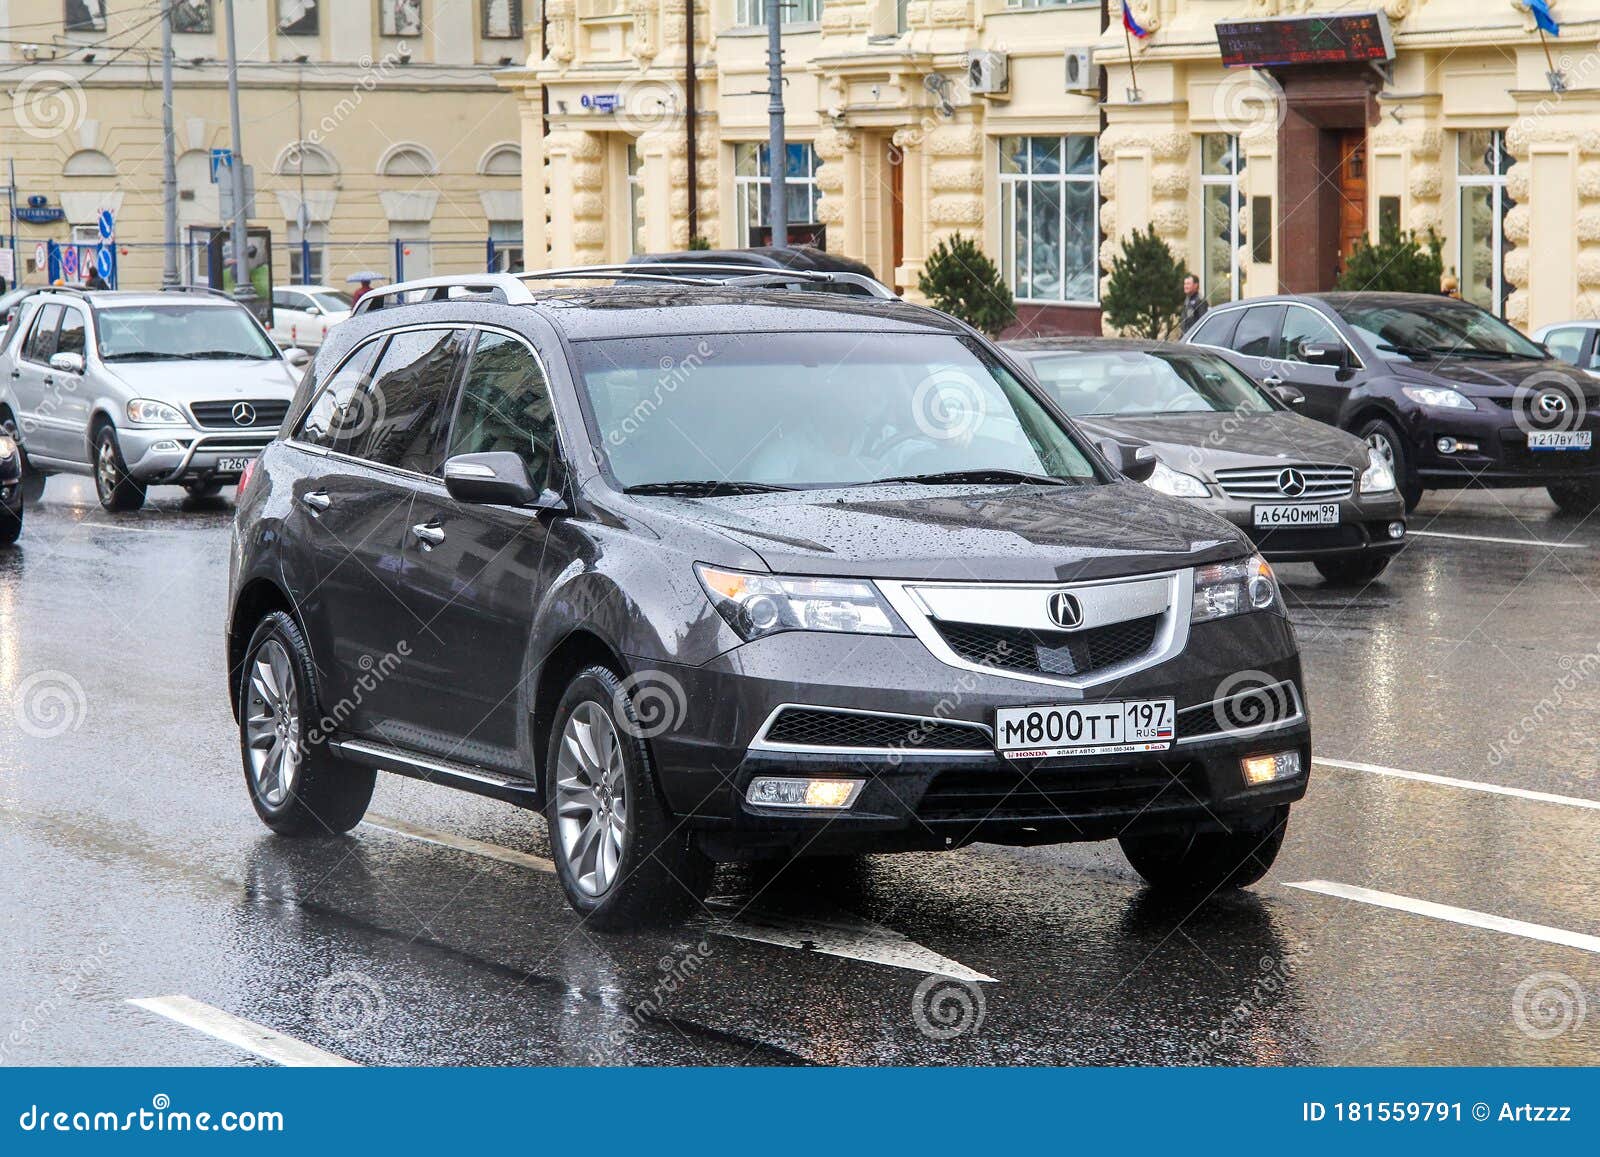 Acura Mdx Photos Free Royalty Free Stock Photos From Dreamstime